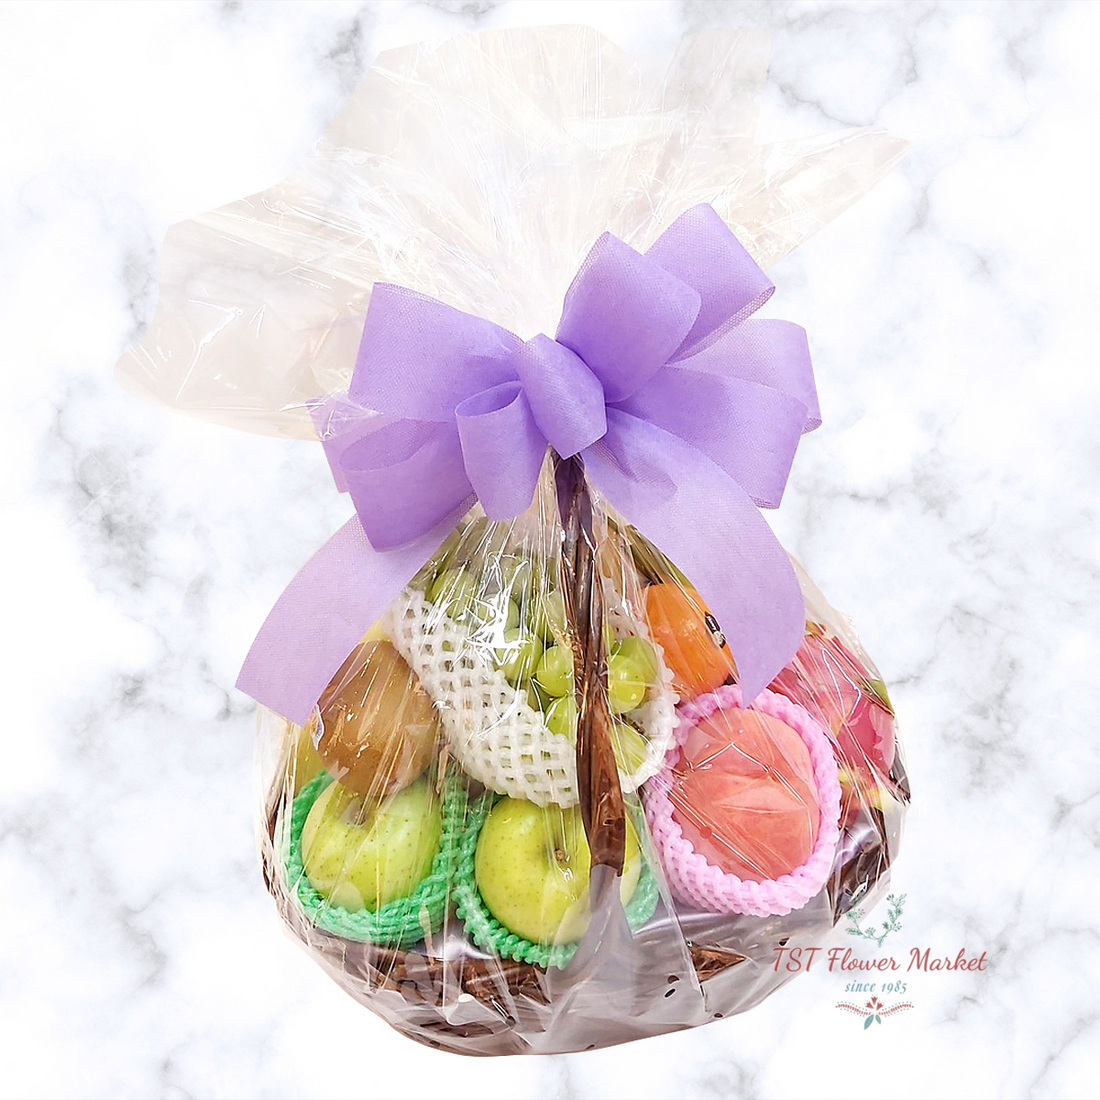 Mid Autumn Hamper 中秋節果籃A07-This hamper is packed with apples, peaches, grapes, oranges, etc.-TST Flower Market